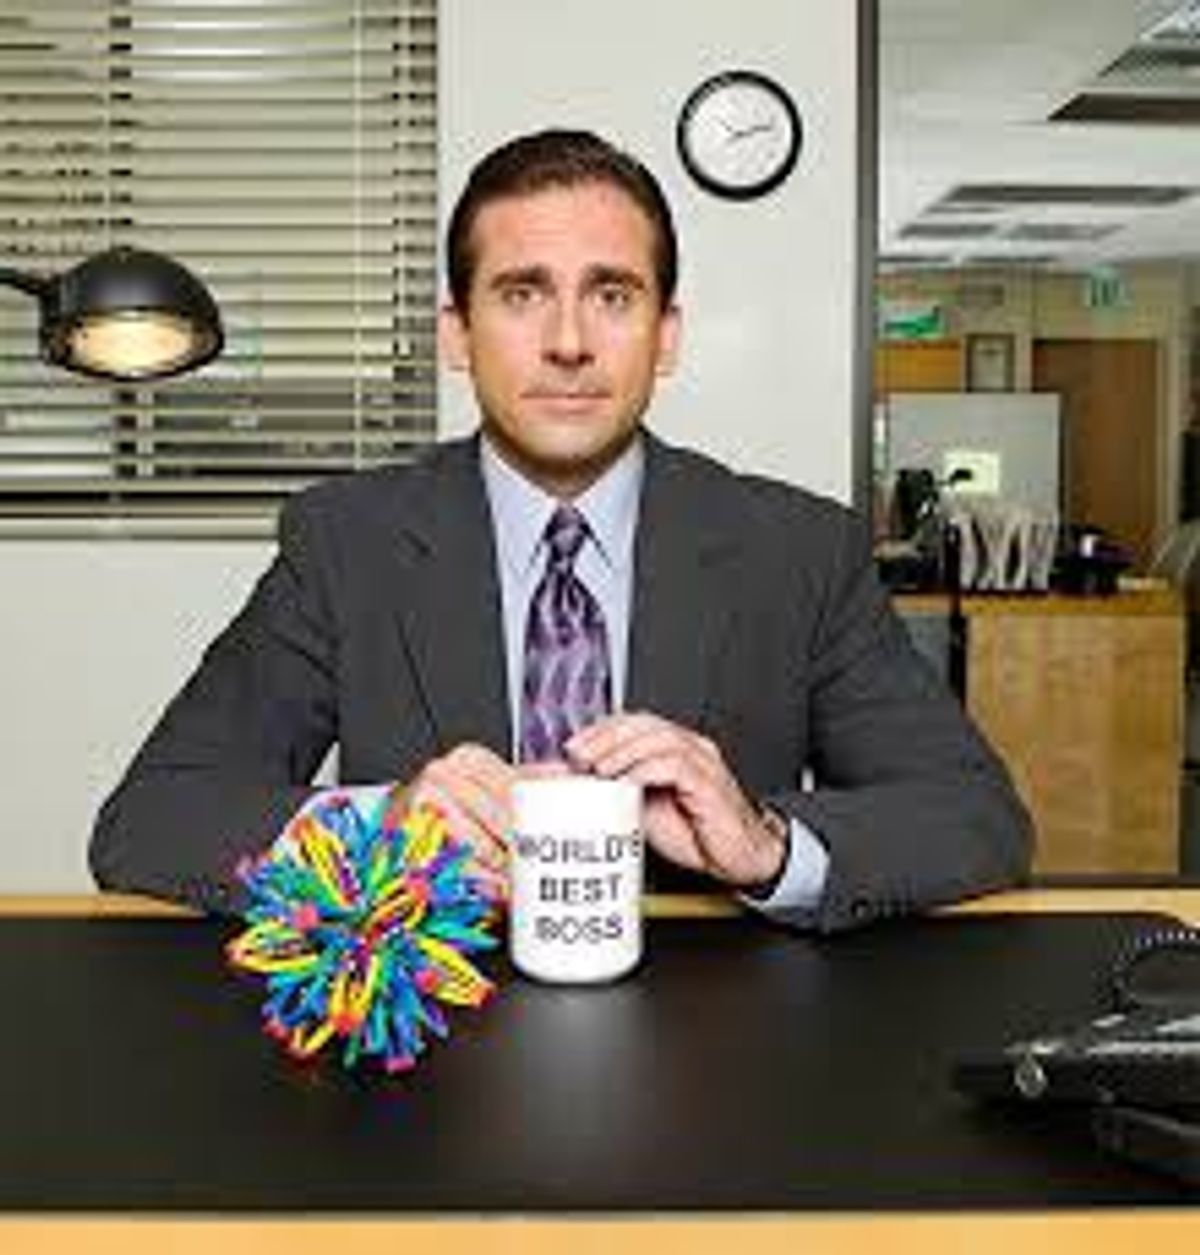 Sorority Recruitment as Told by "The Office"